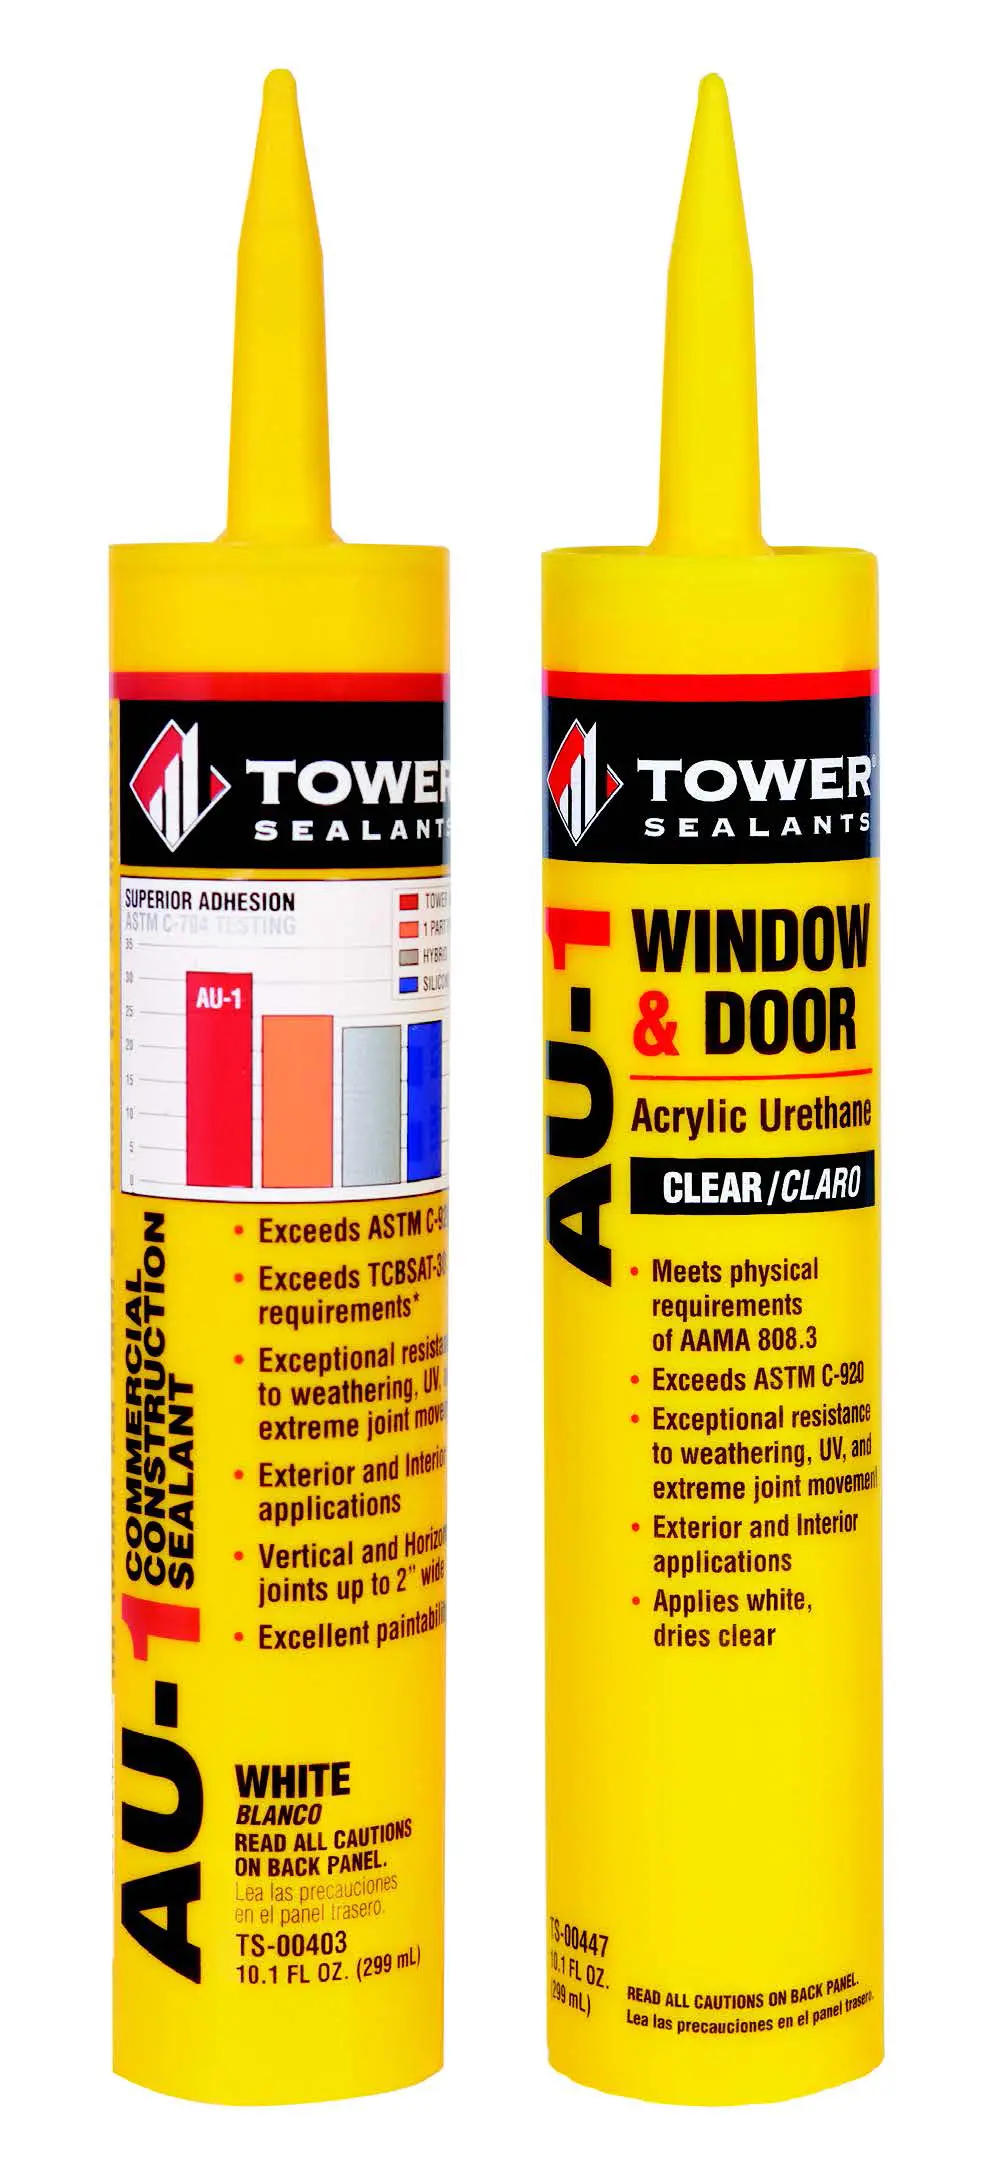 Tower Sealant and Tower Sealants Window & Door Caulk Tubes Side by Side